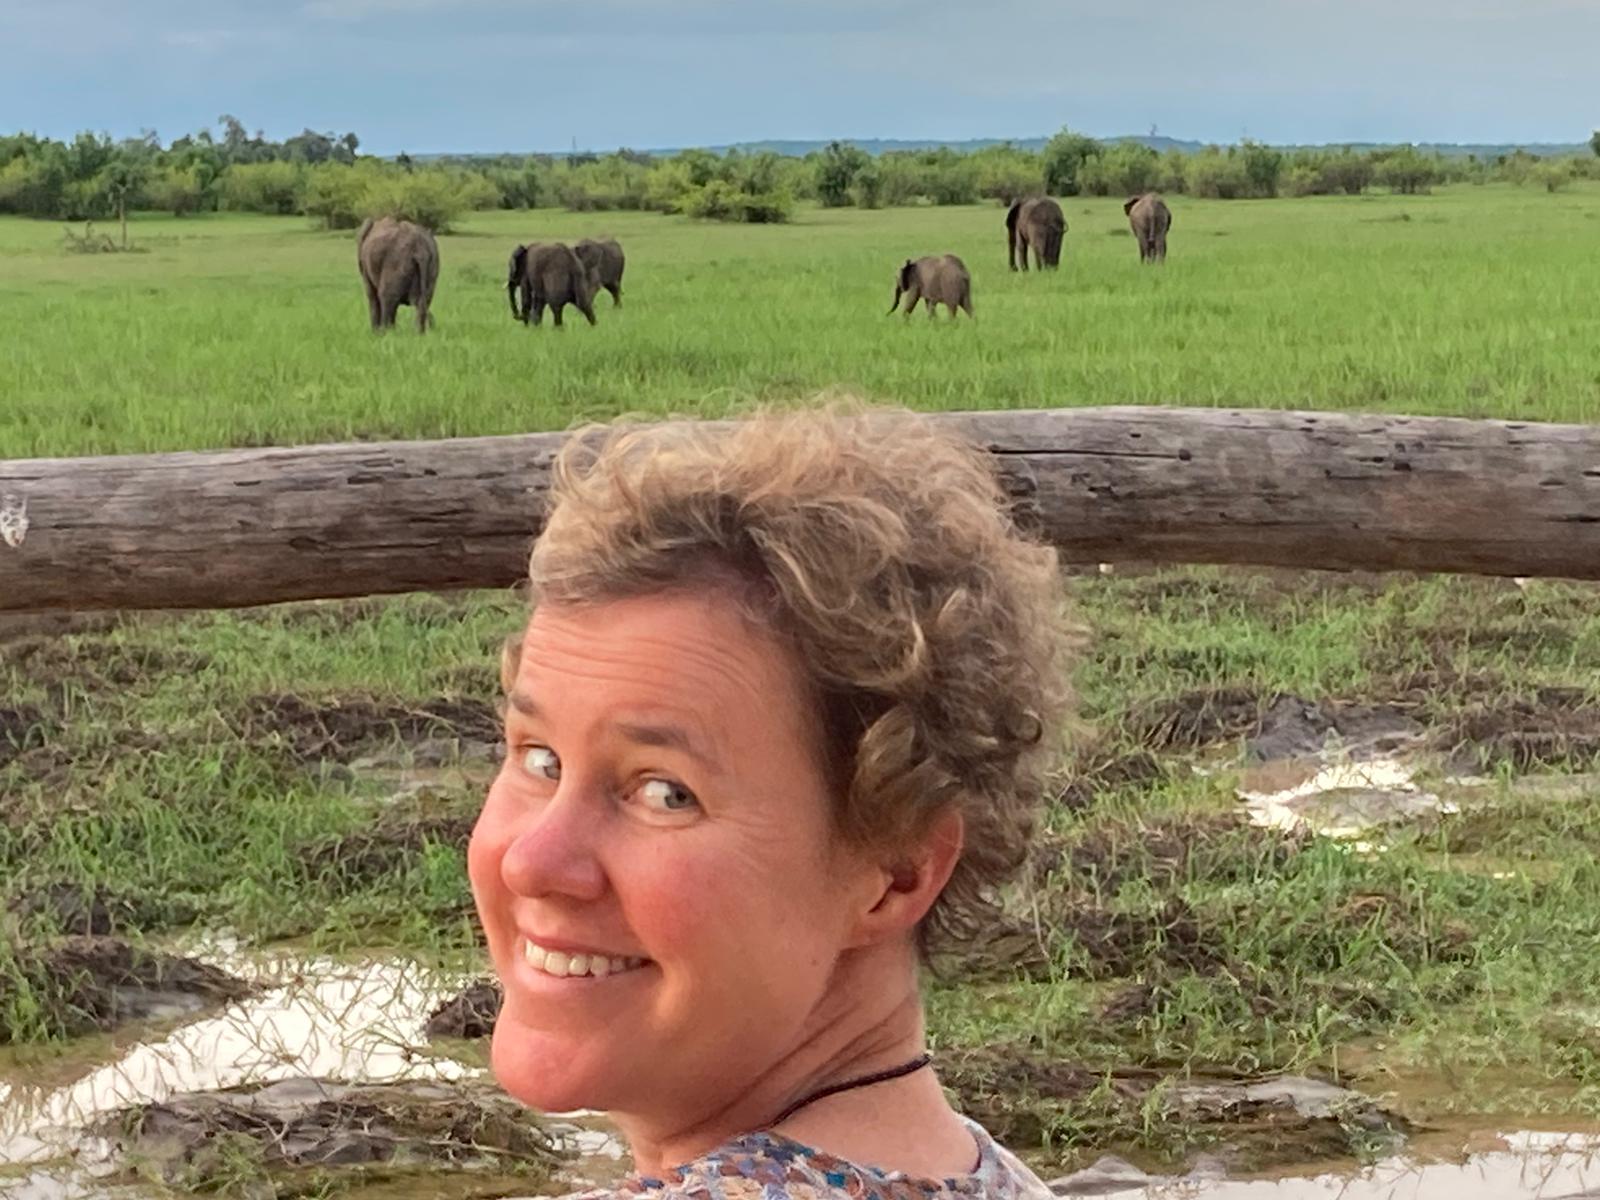 Woman looking over her shoulder smiling with elephants in the background